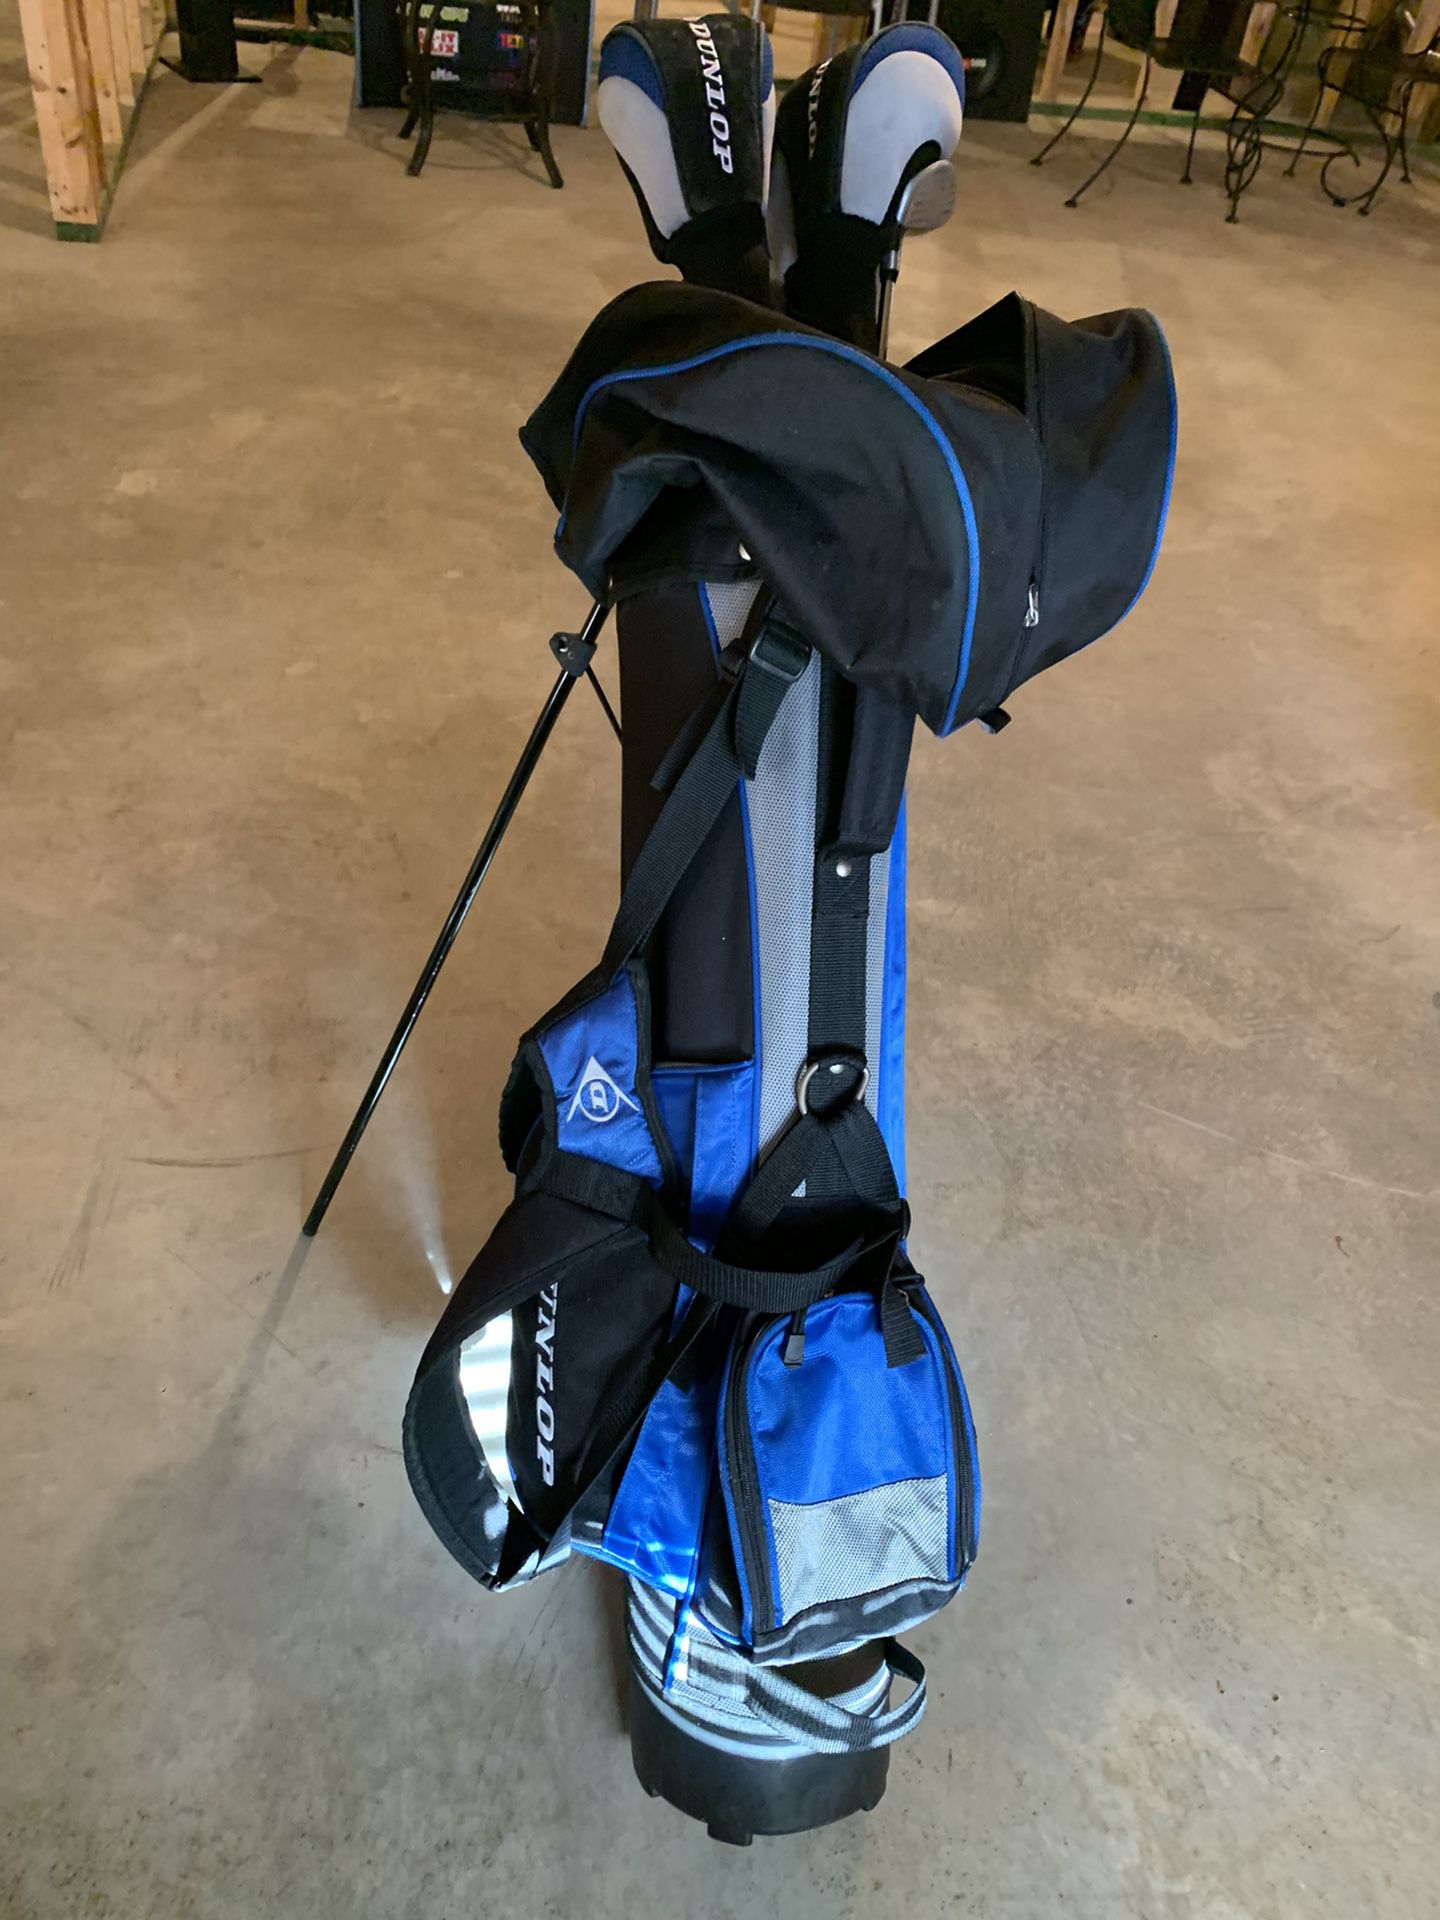 Dunlop Golf Clubs for only $165.00